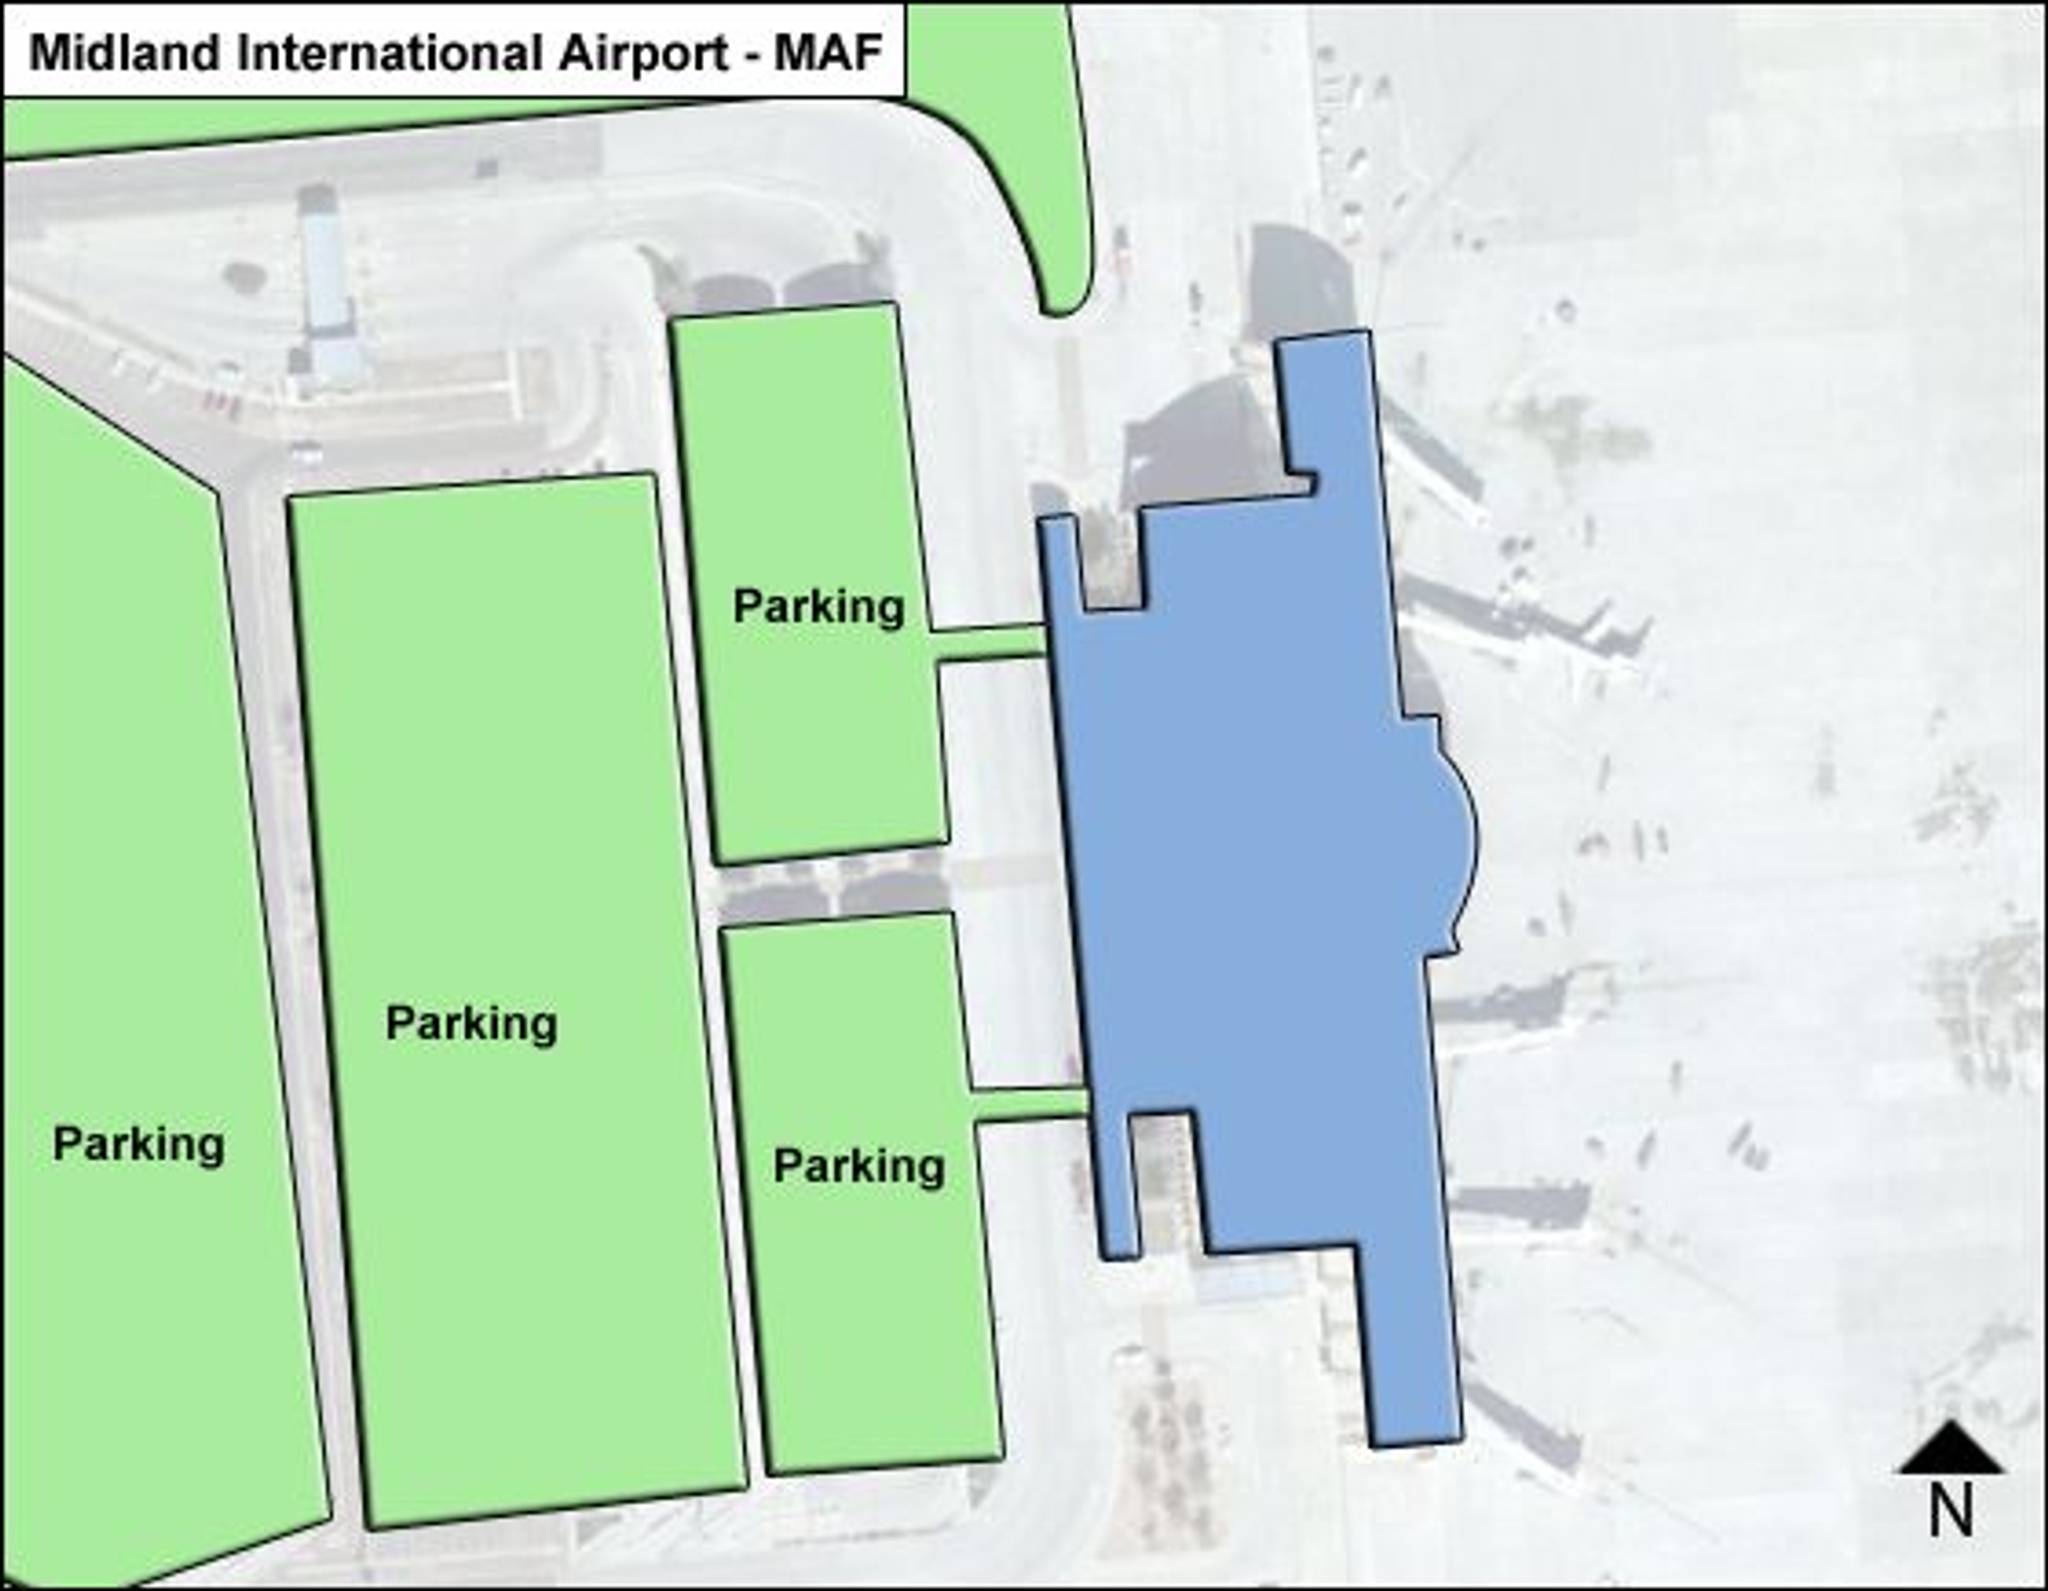 Midland Airport Map: Guide to MAF's Terminals